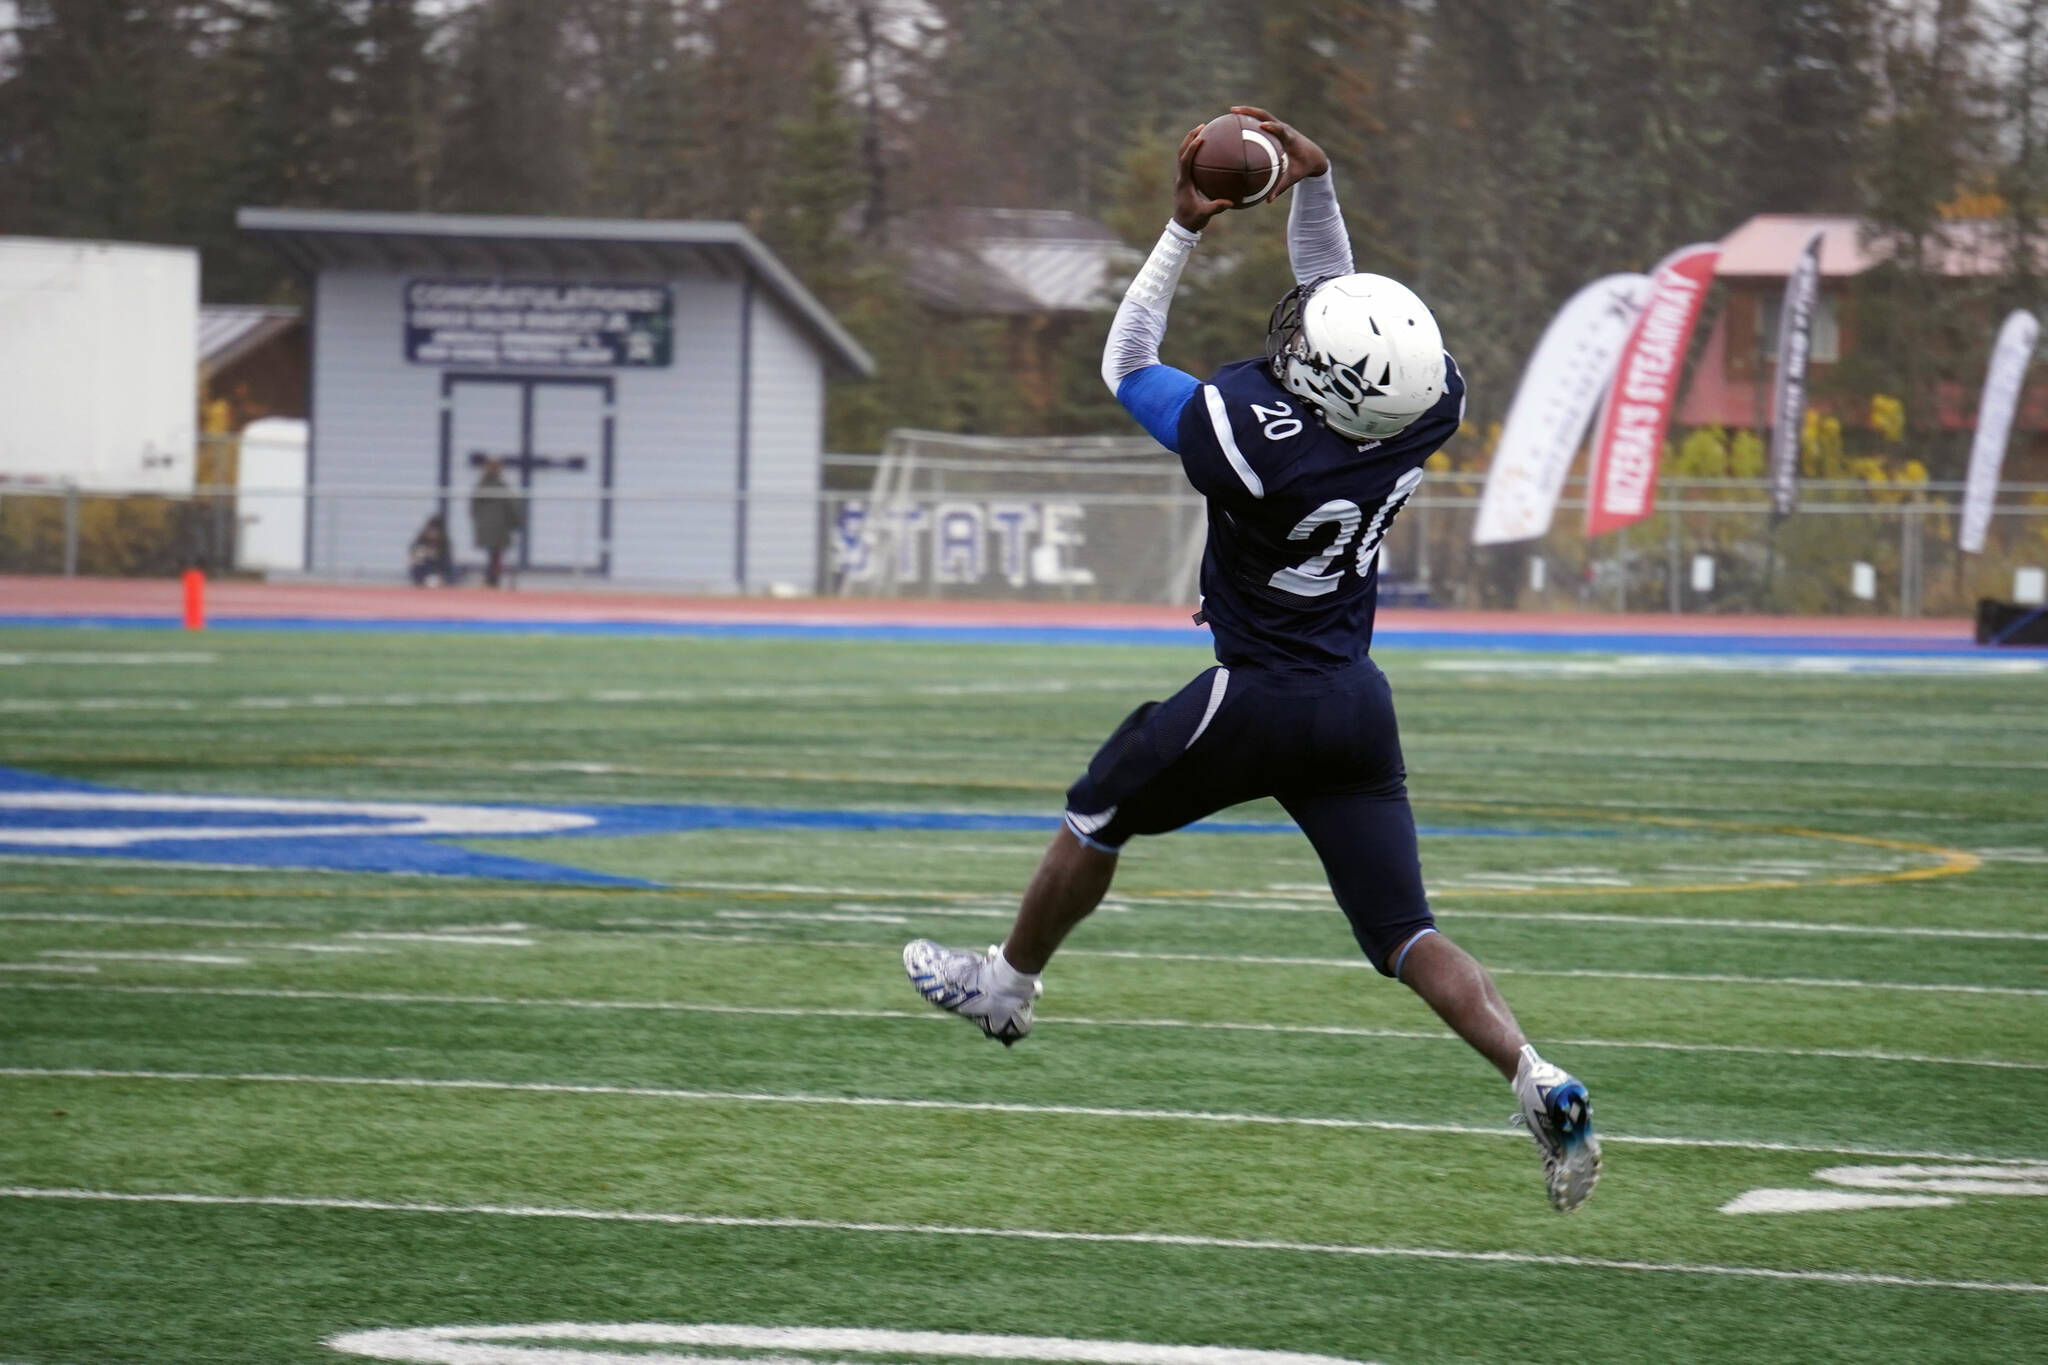 Soldotna’s Andon Wolverton leaps to catch the ball in the Division II semifinal against North Pole at Justin Maile Field in Soldotna, Alaska, on Saturday, Oct. 14, 2023. (Jake Dye/Peninsula Clarion)